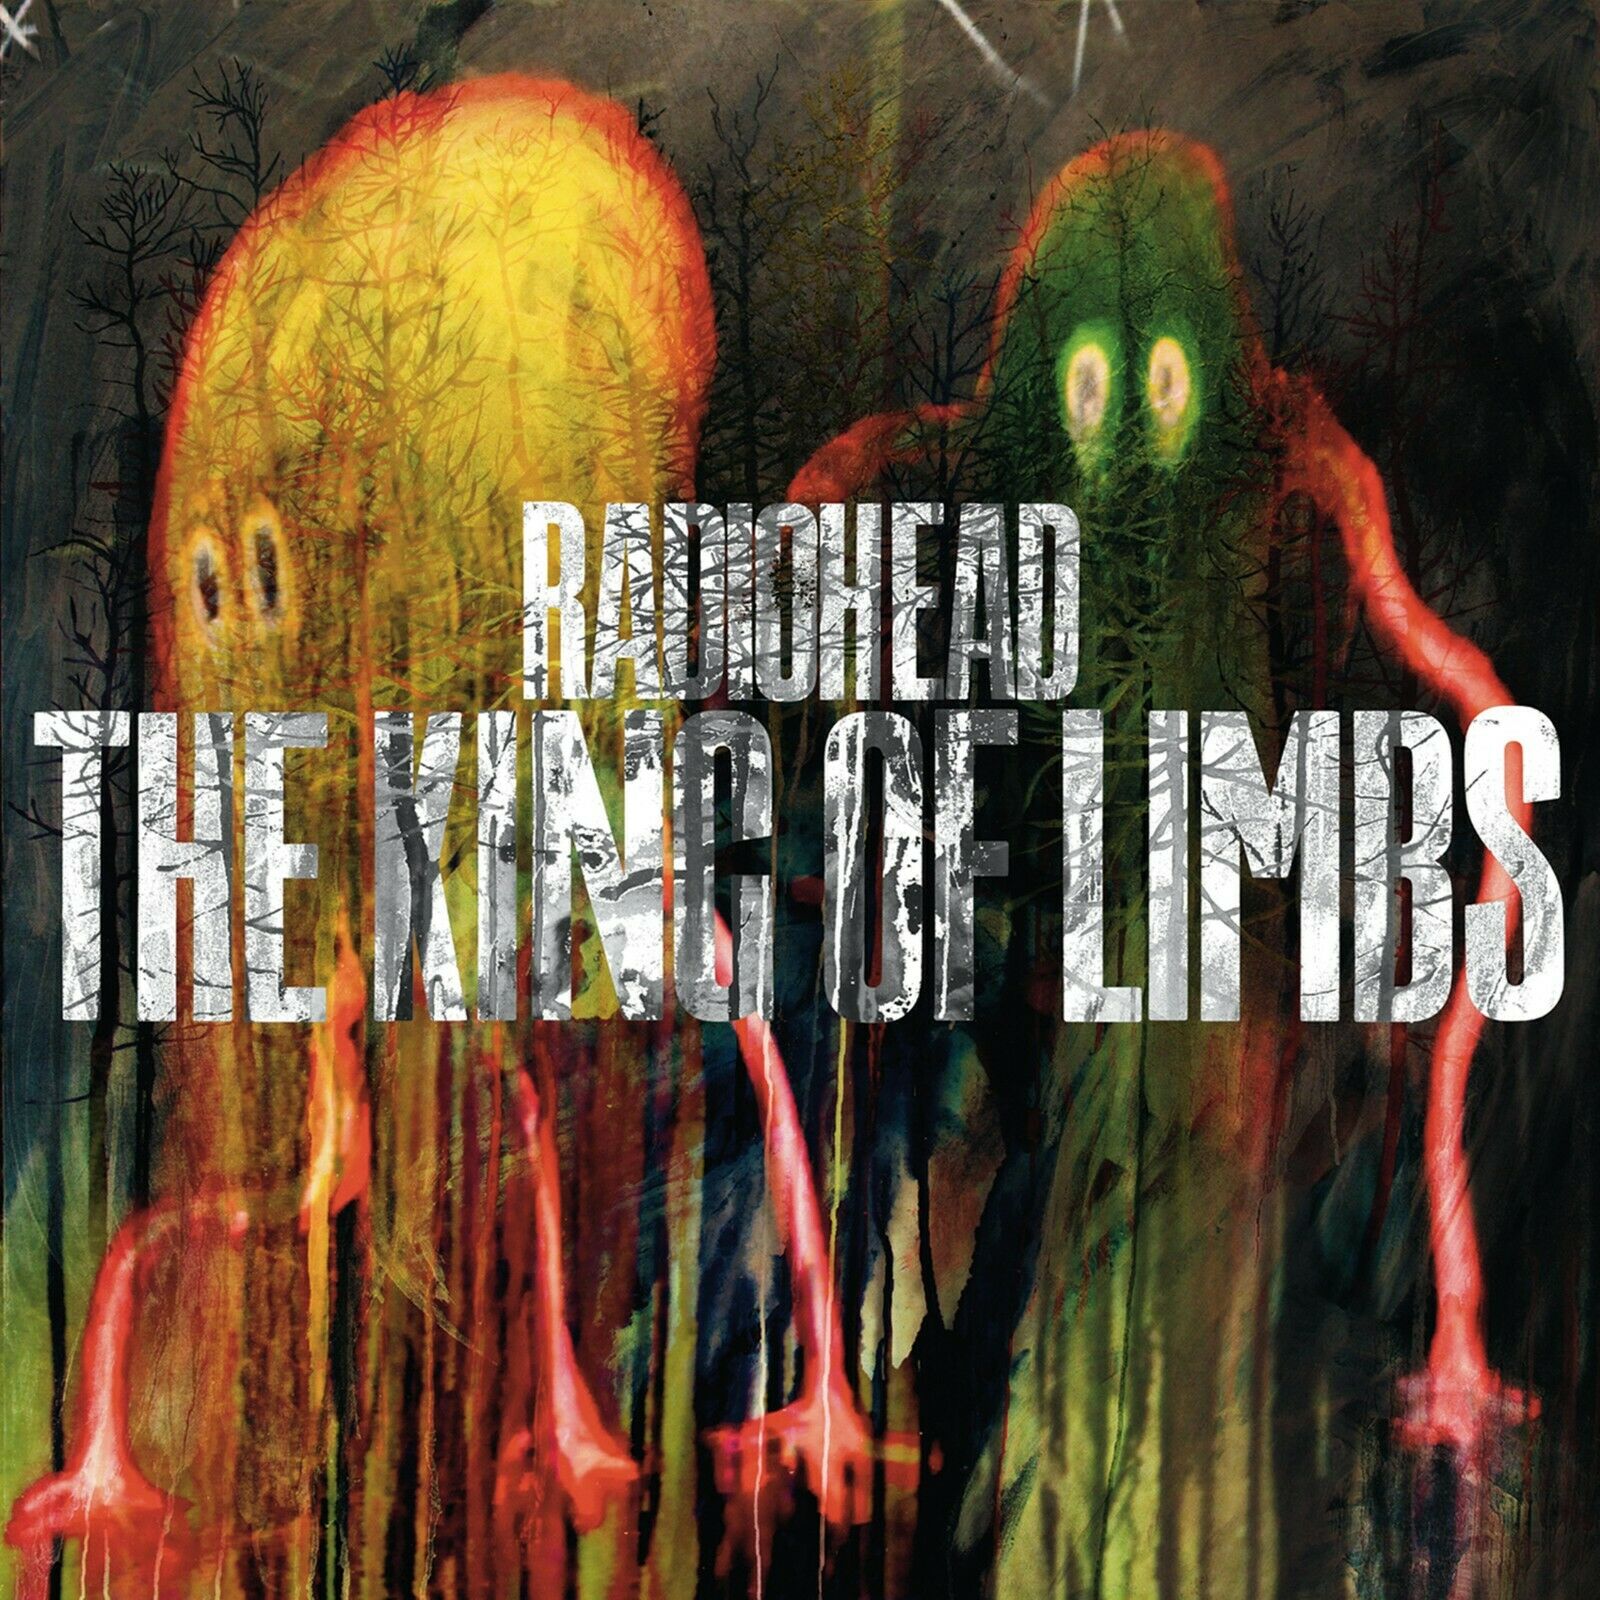 Radiohead The King Of Limbs Banner Huge 4x4 Ft Fabric Poster Tapestry Flag Art